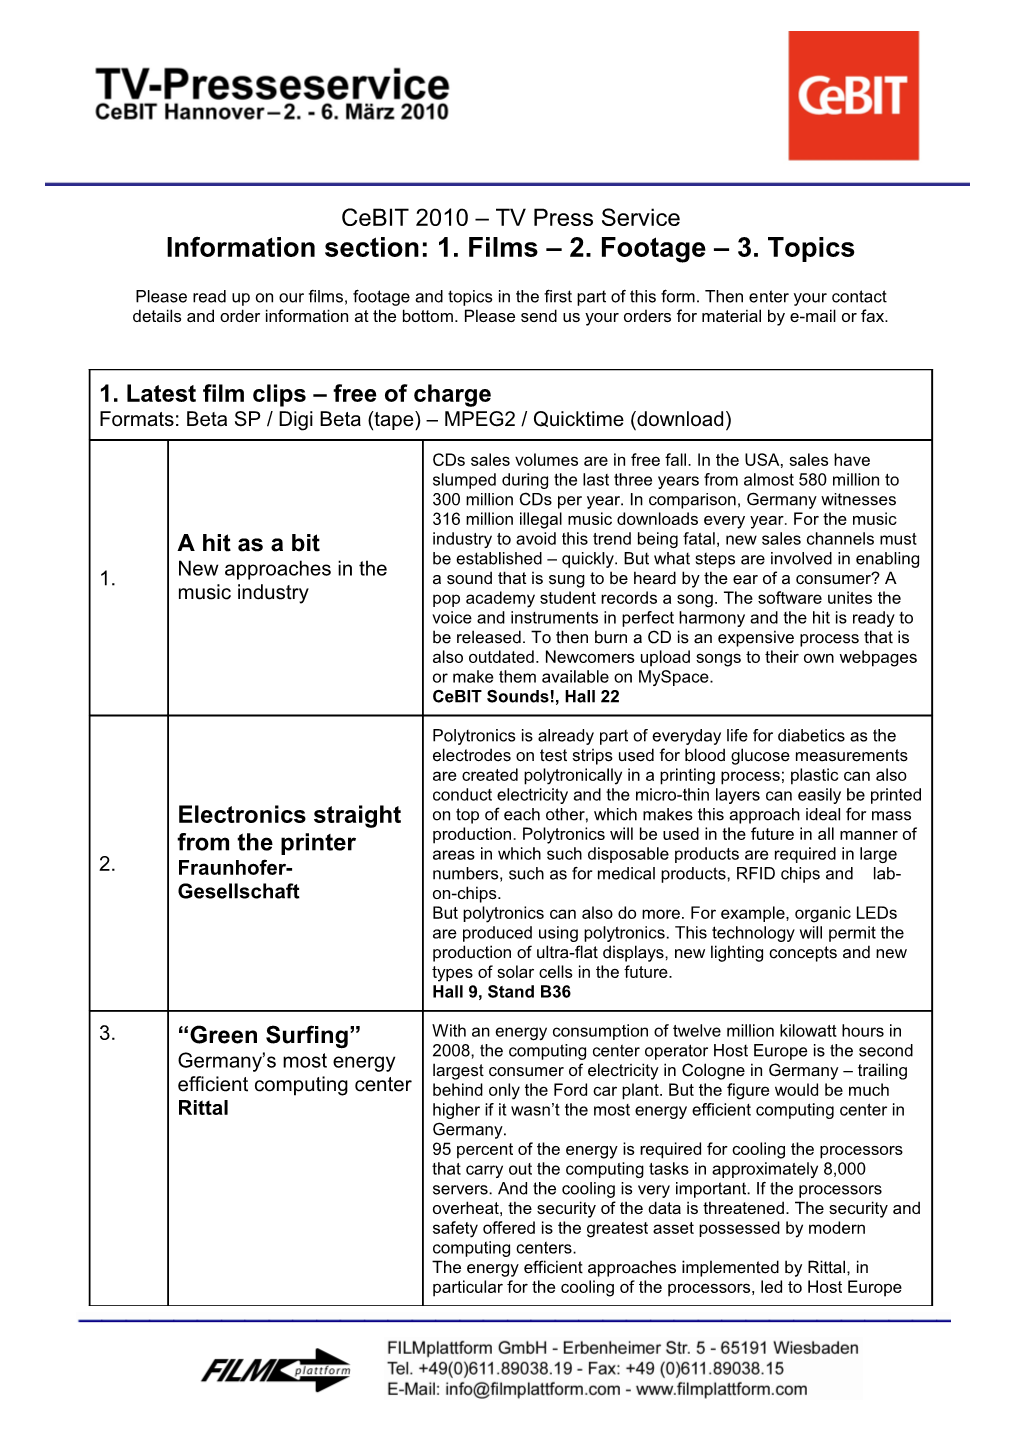 Information Section: 1. Films 2. Footage 3. Topics